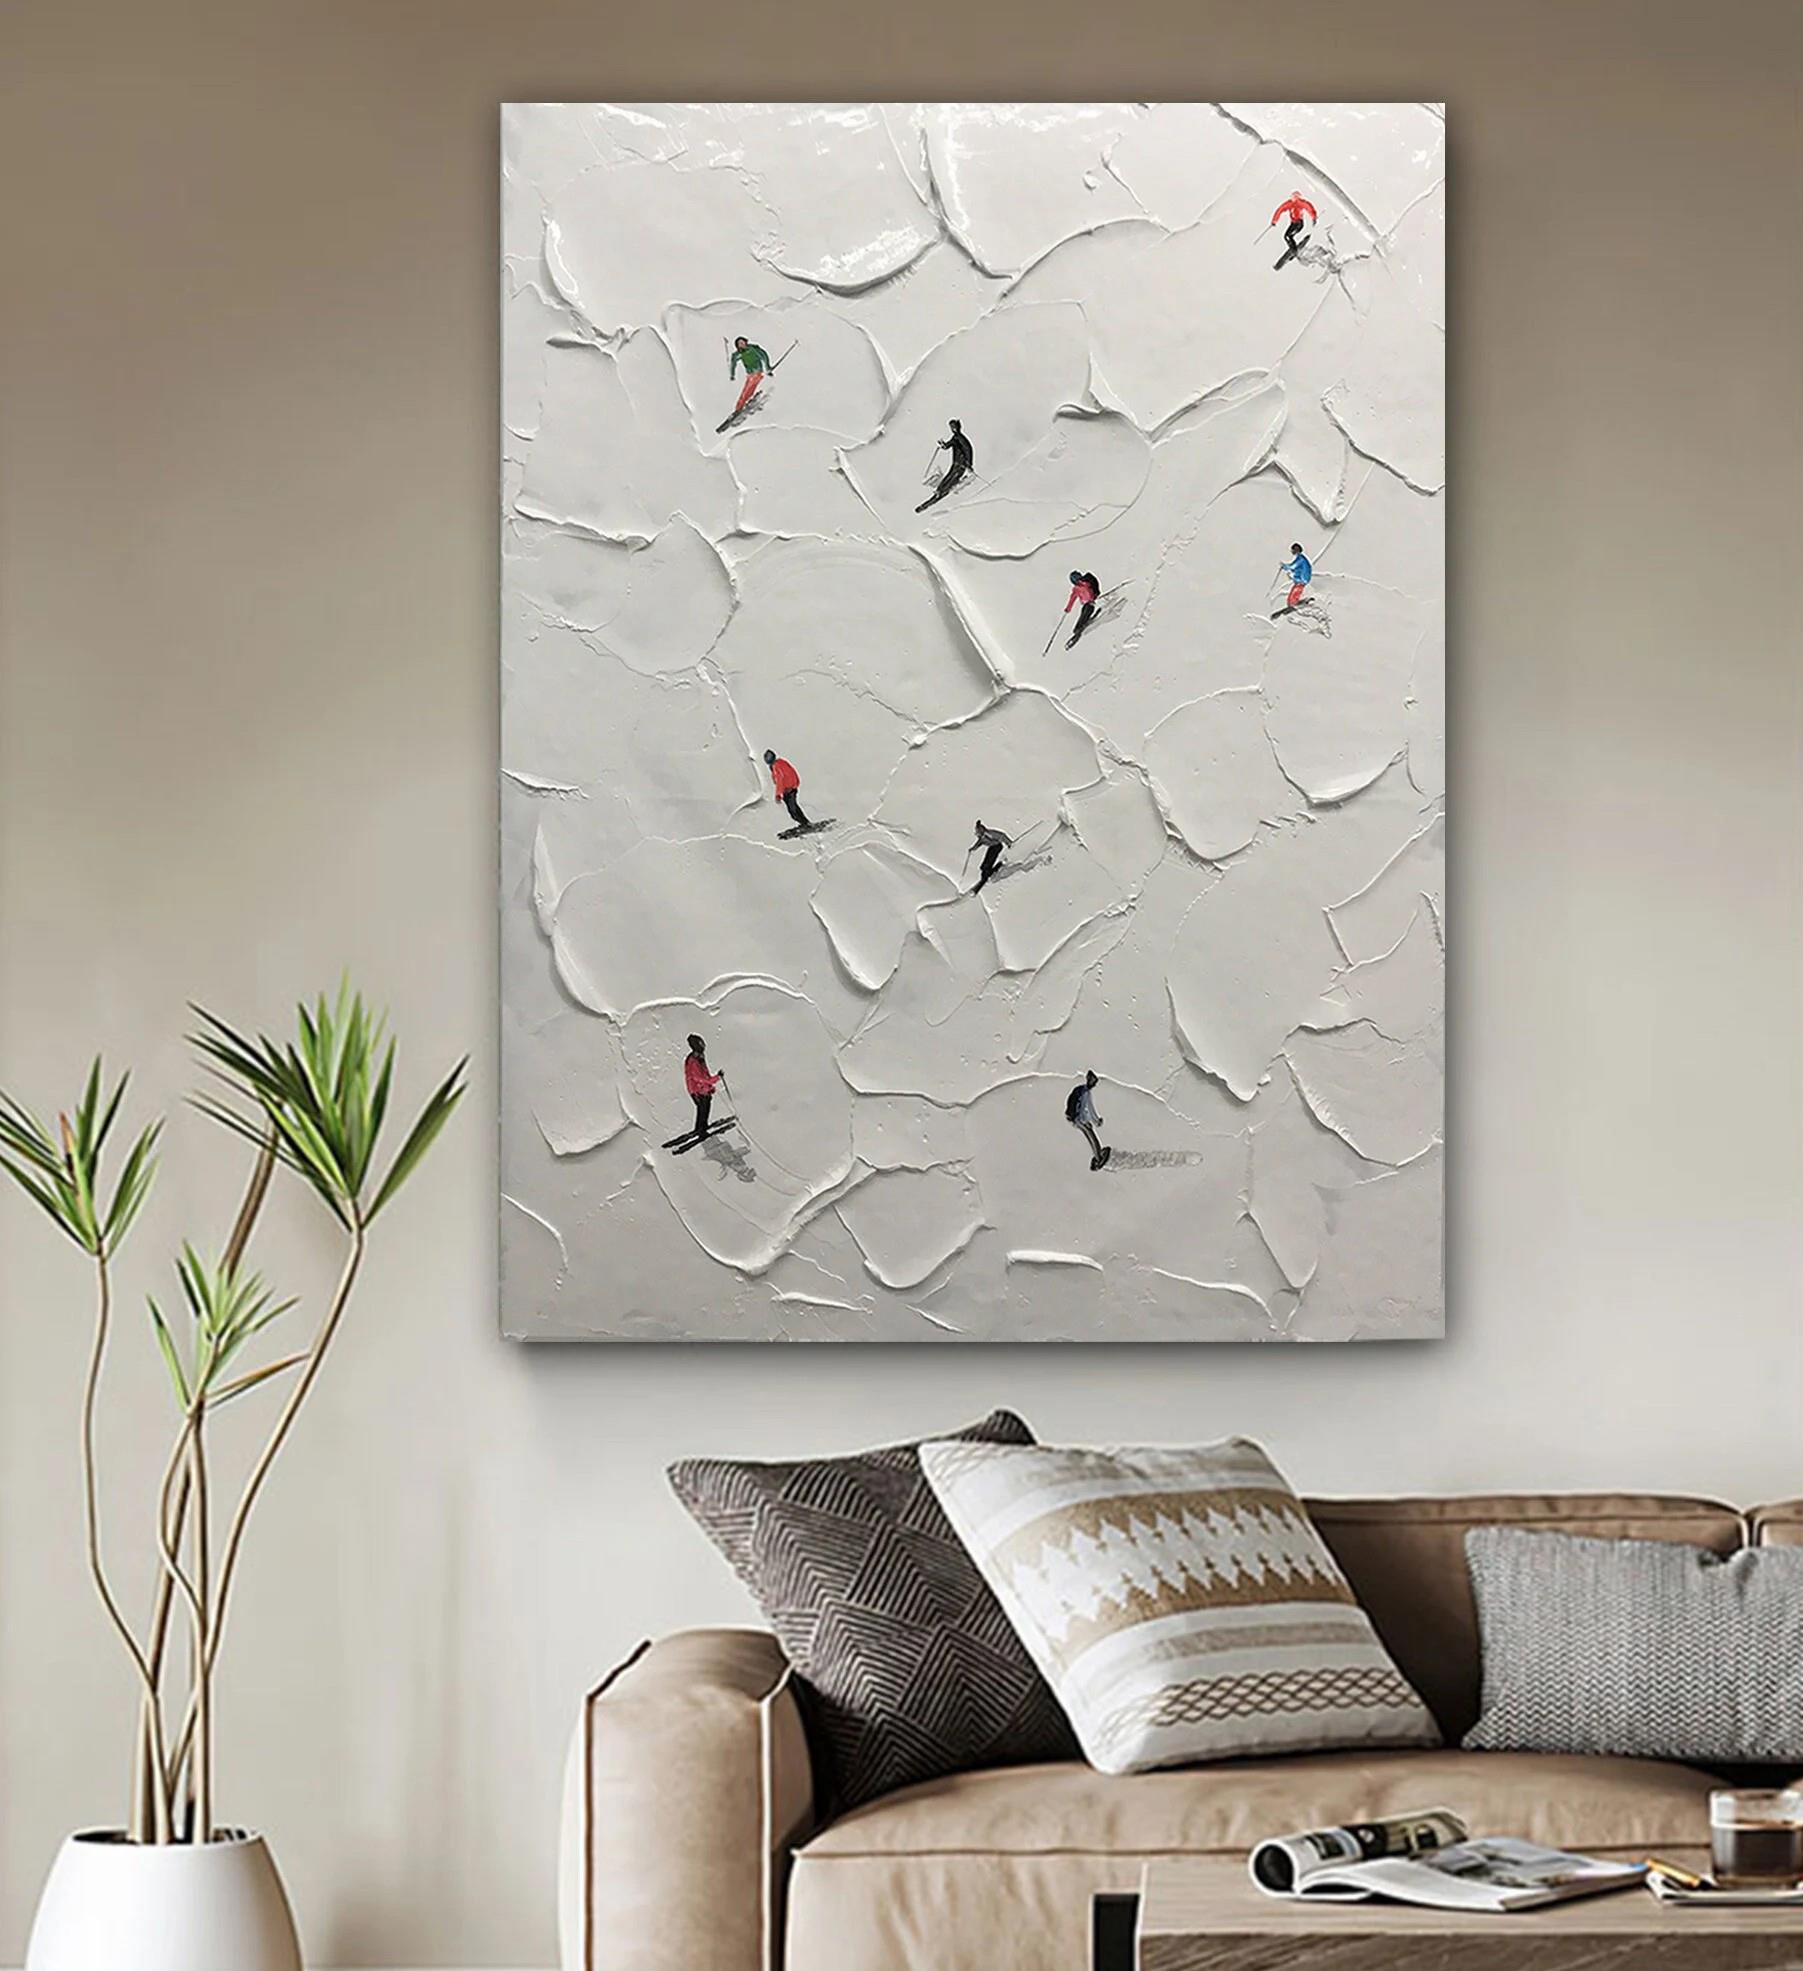 Skier on Snowy Mountain Wall Art Sport White Snow Skiing Room Decor by Knife 06 Oil Paintings